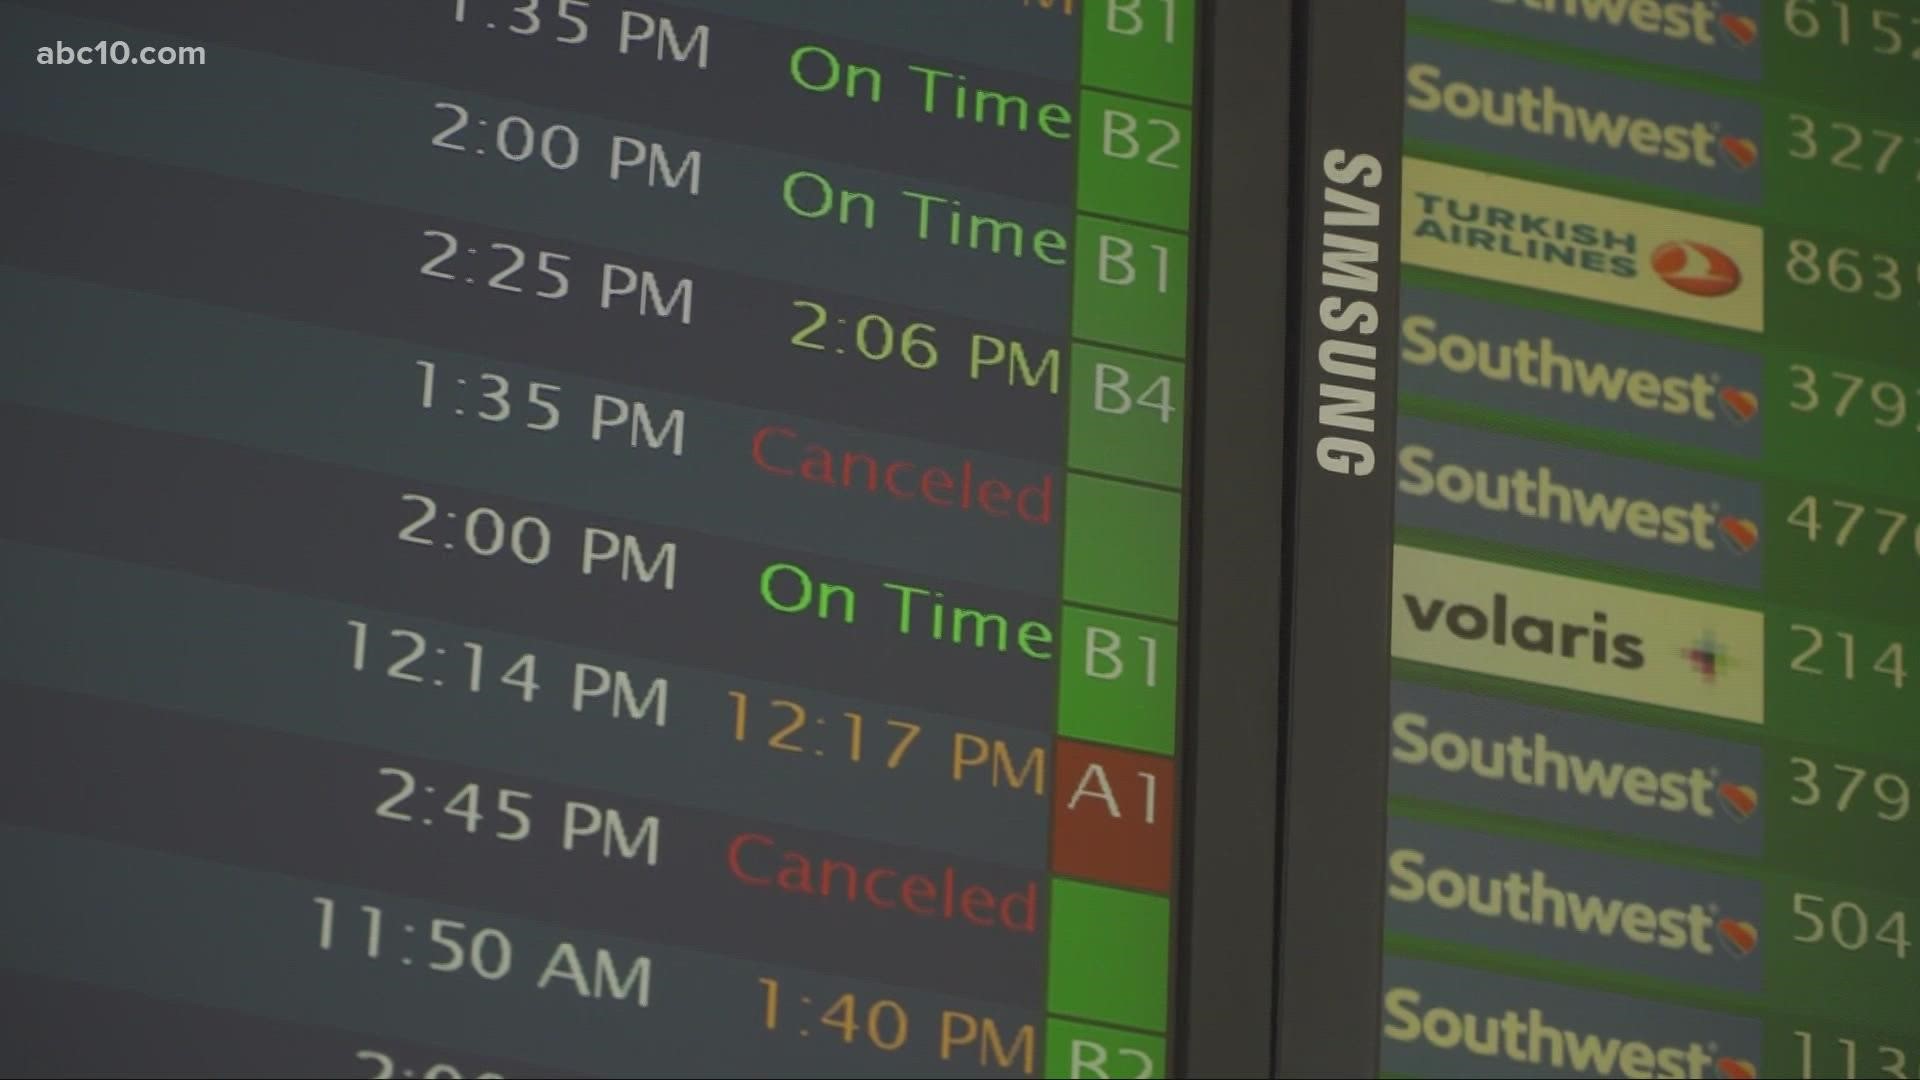 Southwest Airlines canceled hundreds of flights over the weekend, blaming the woes on air traffic control issues and weather.